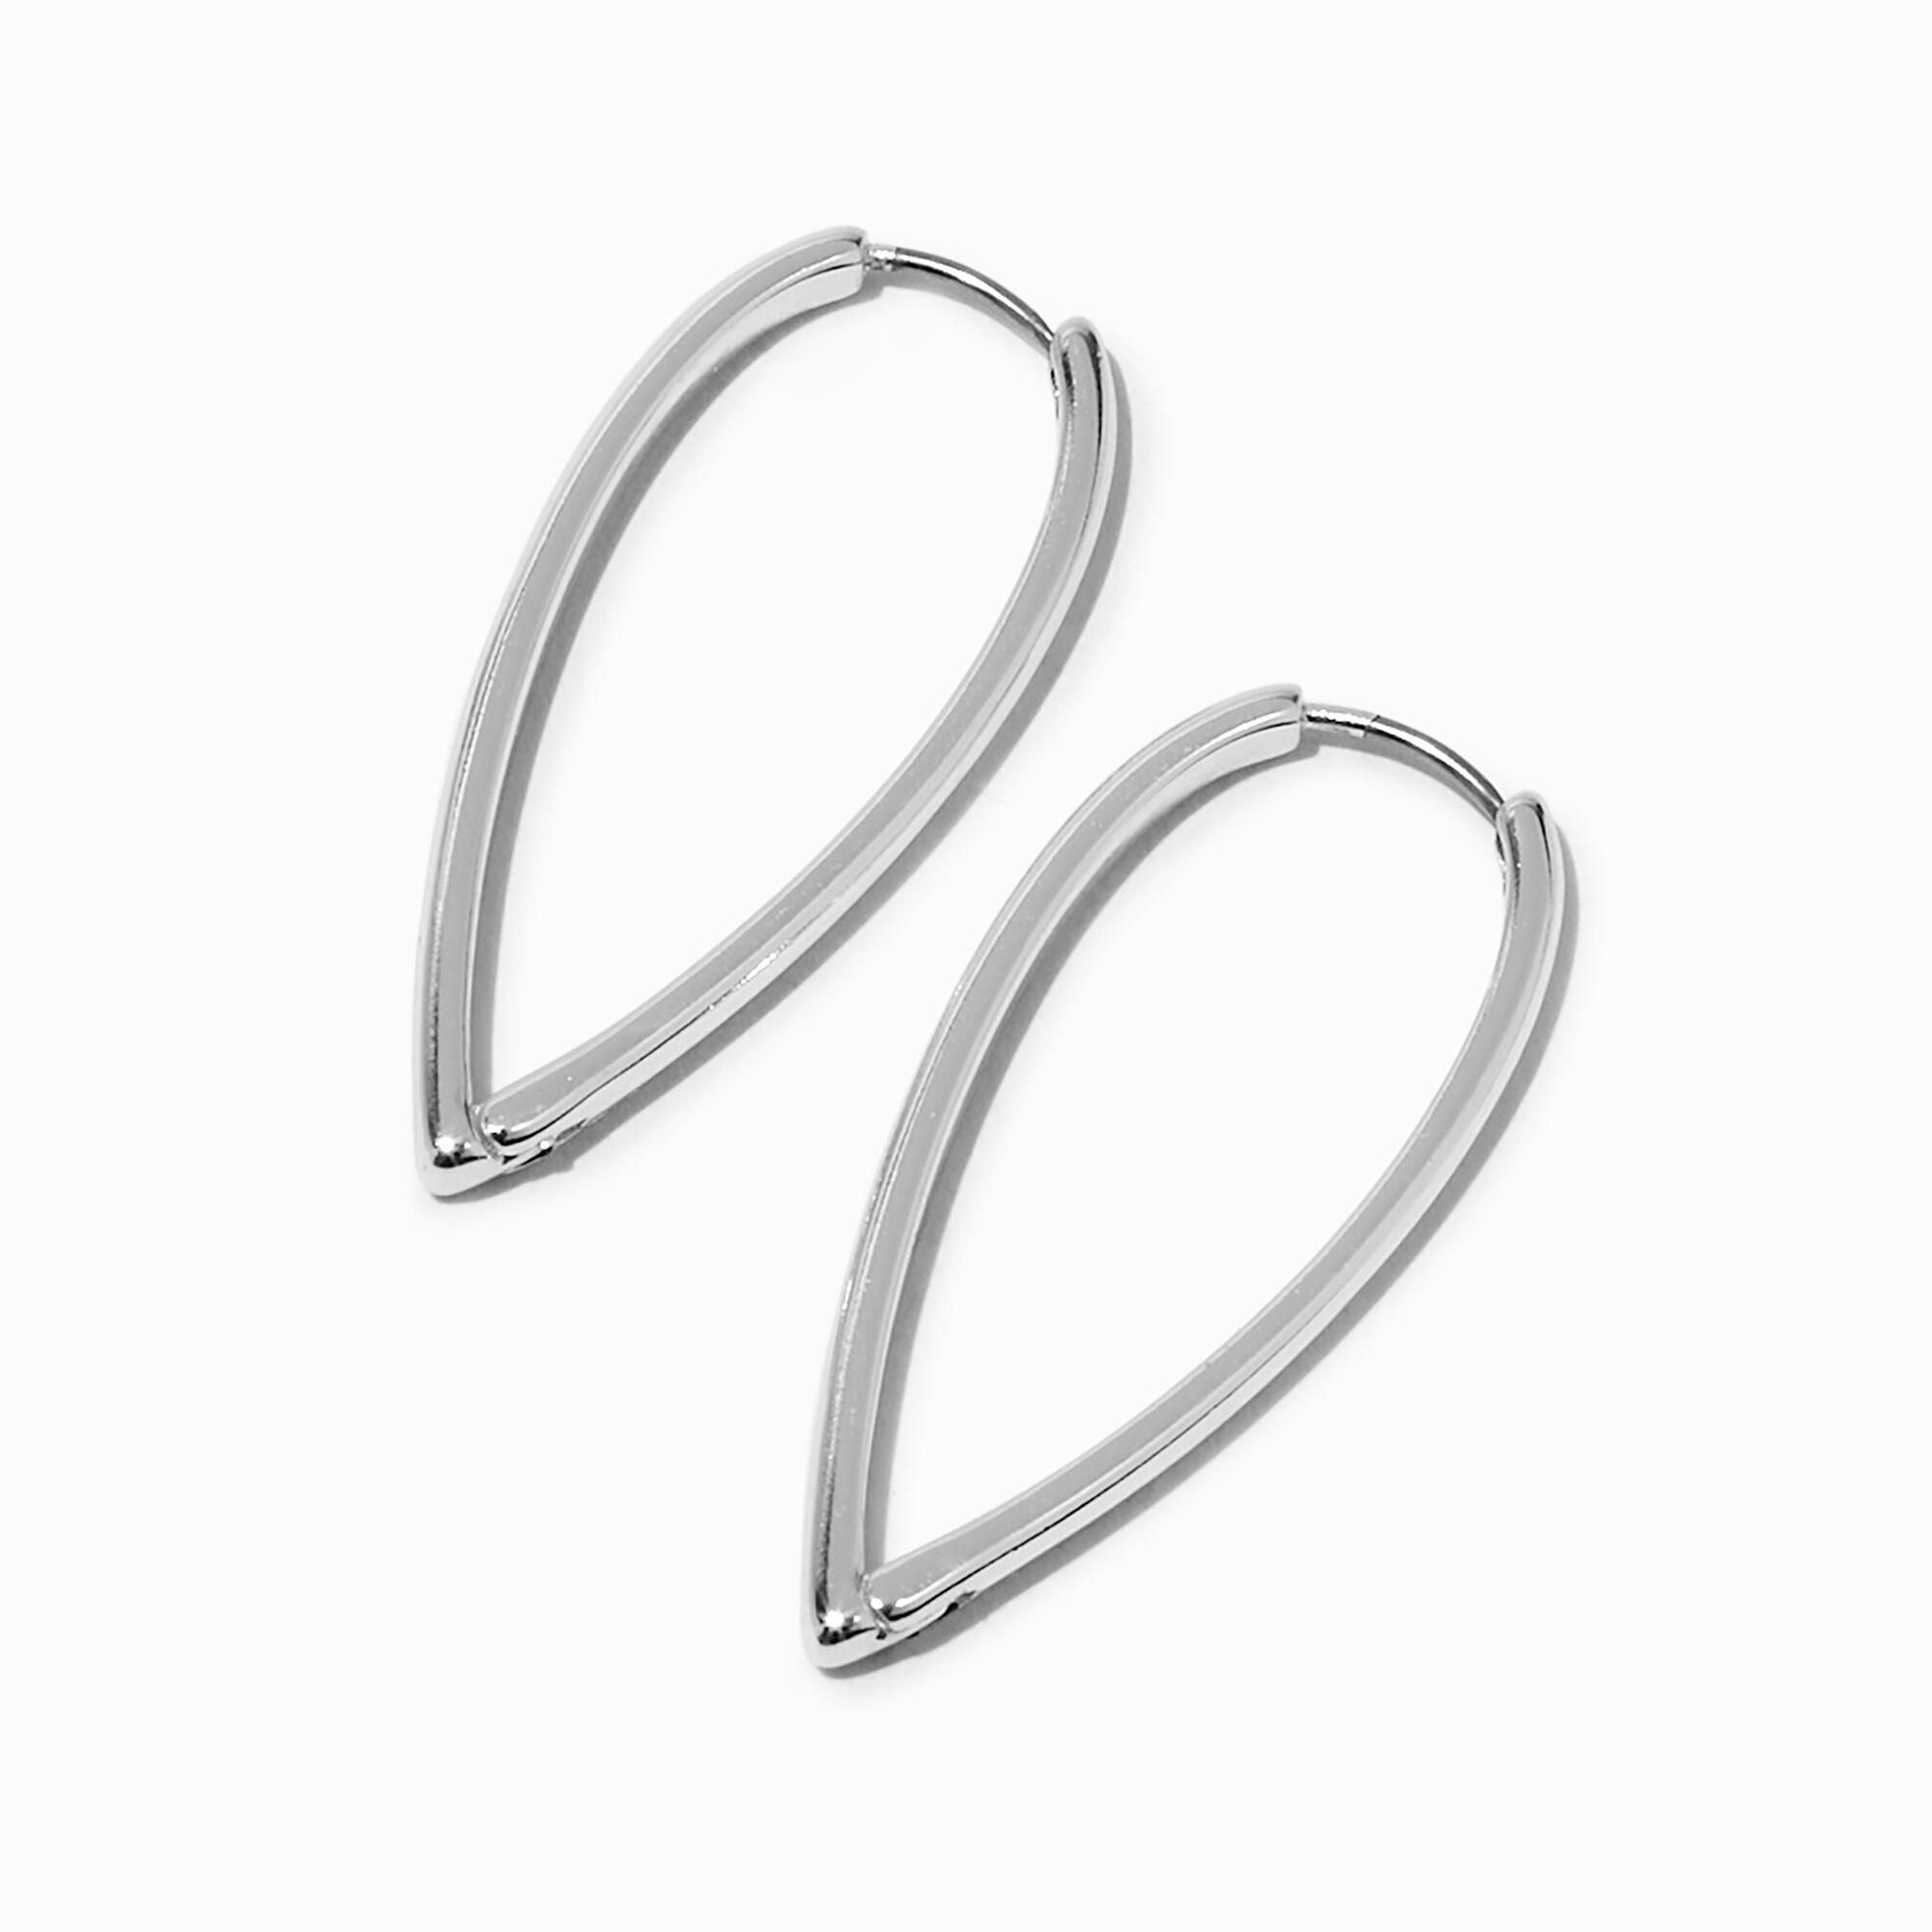 View Claires Tone Pointed 40MM Clicker Hoop Earrings Silver information